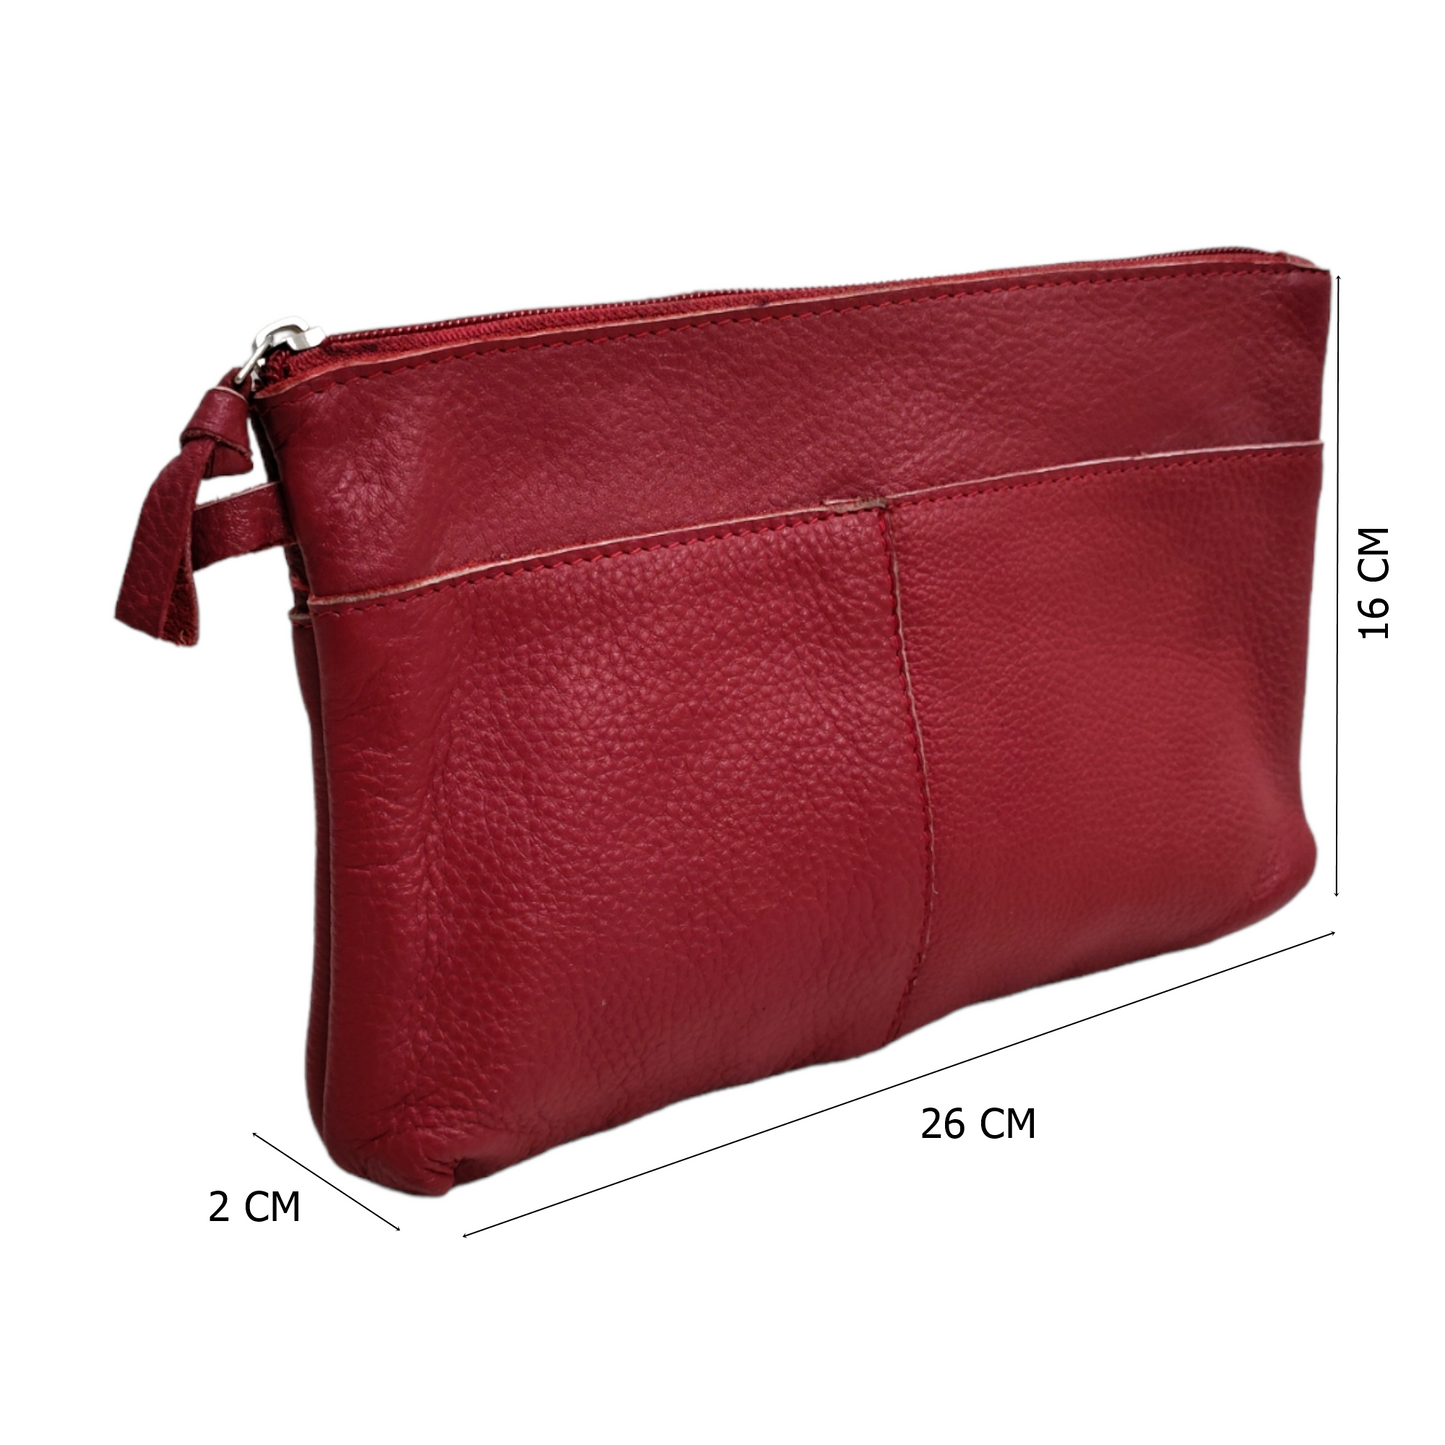 Red Leather Cosmetic Bag Leather Zipper Pouch Leather Make Up Bag Leather Toiletry Bag